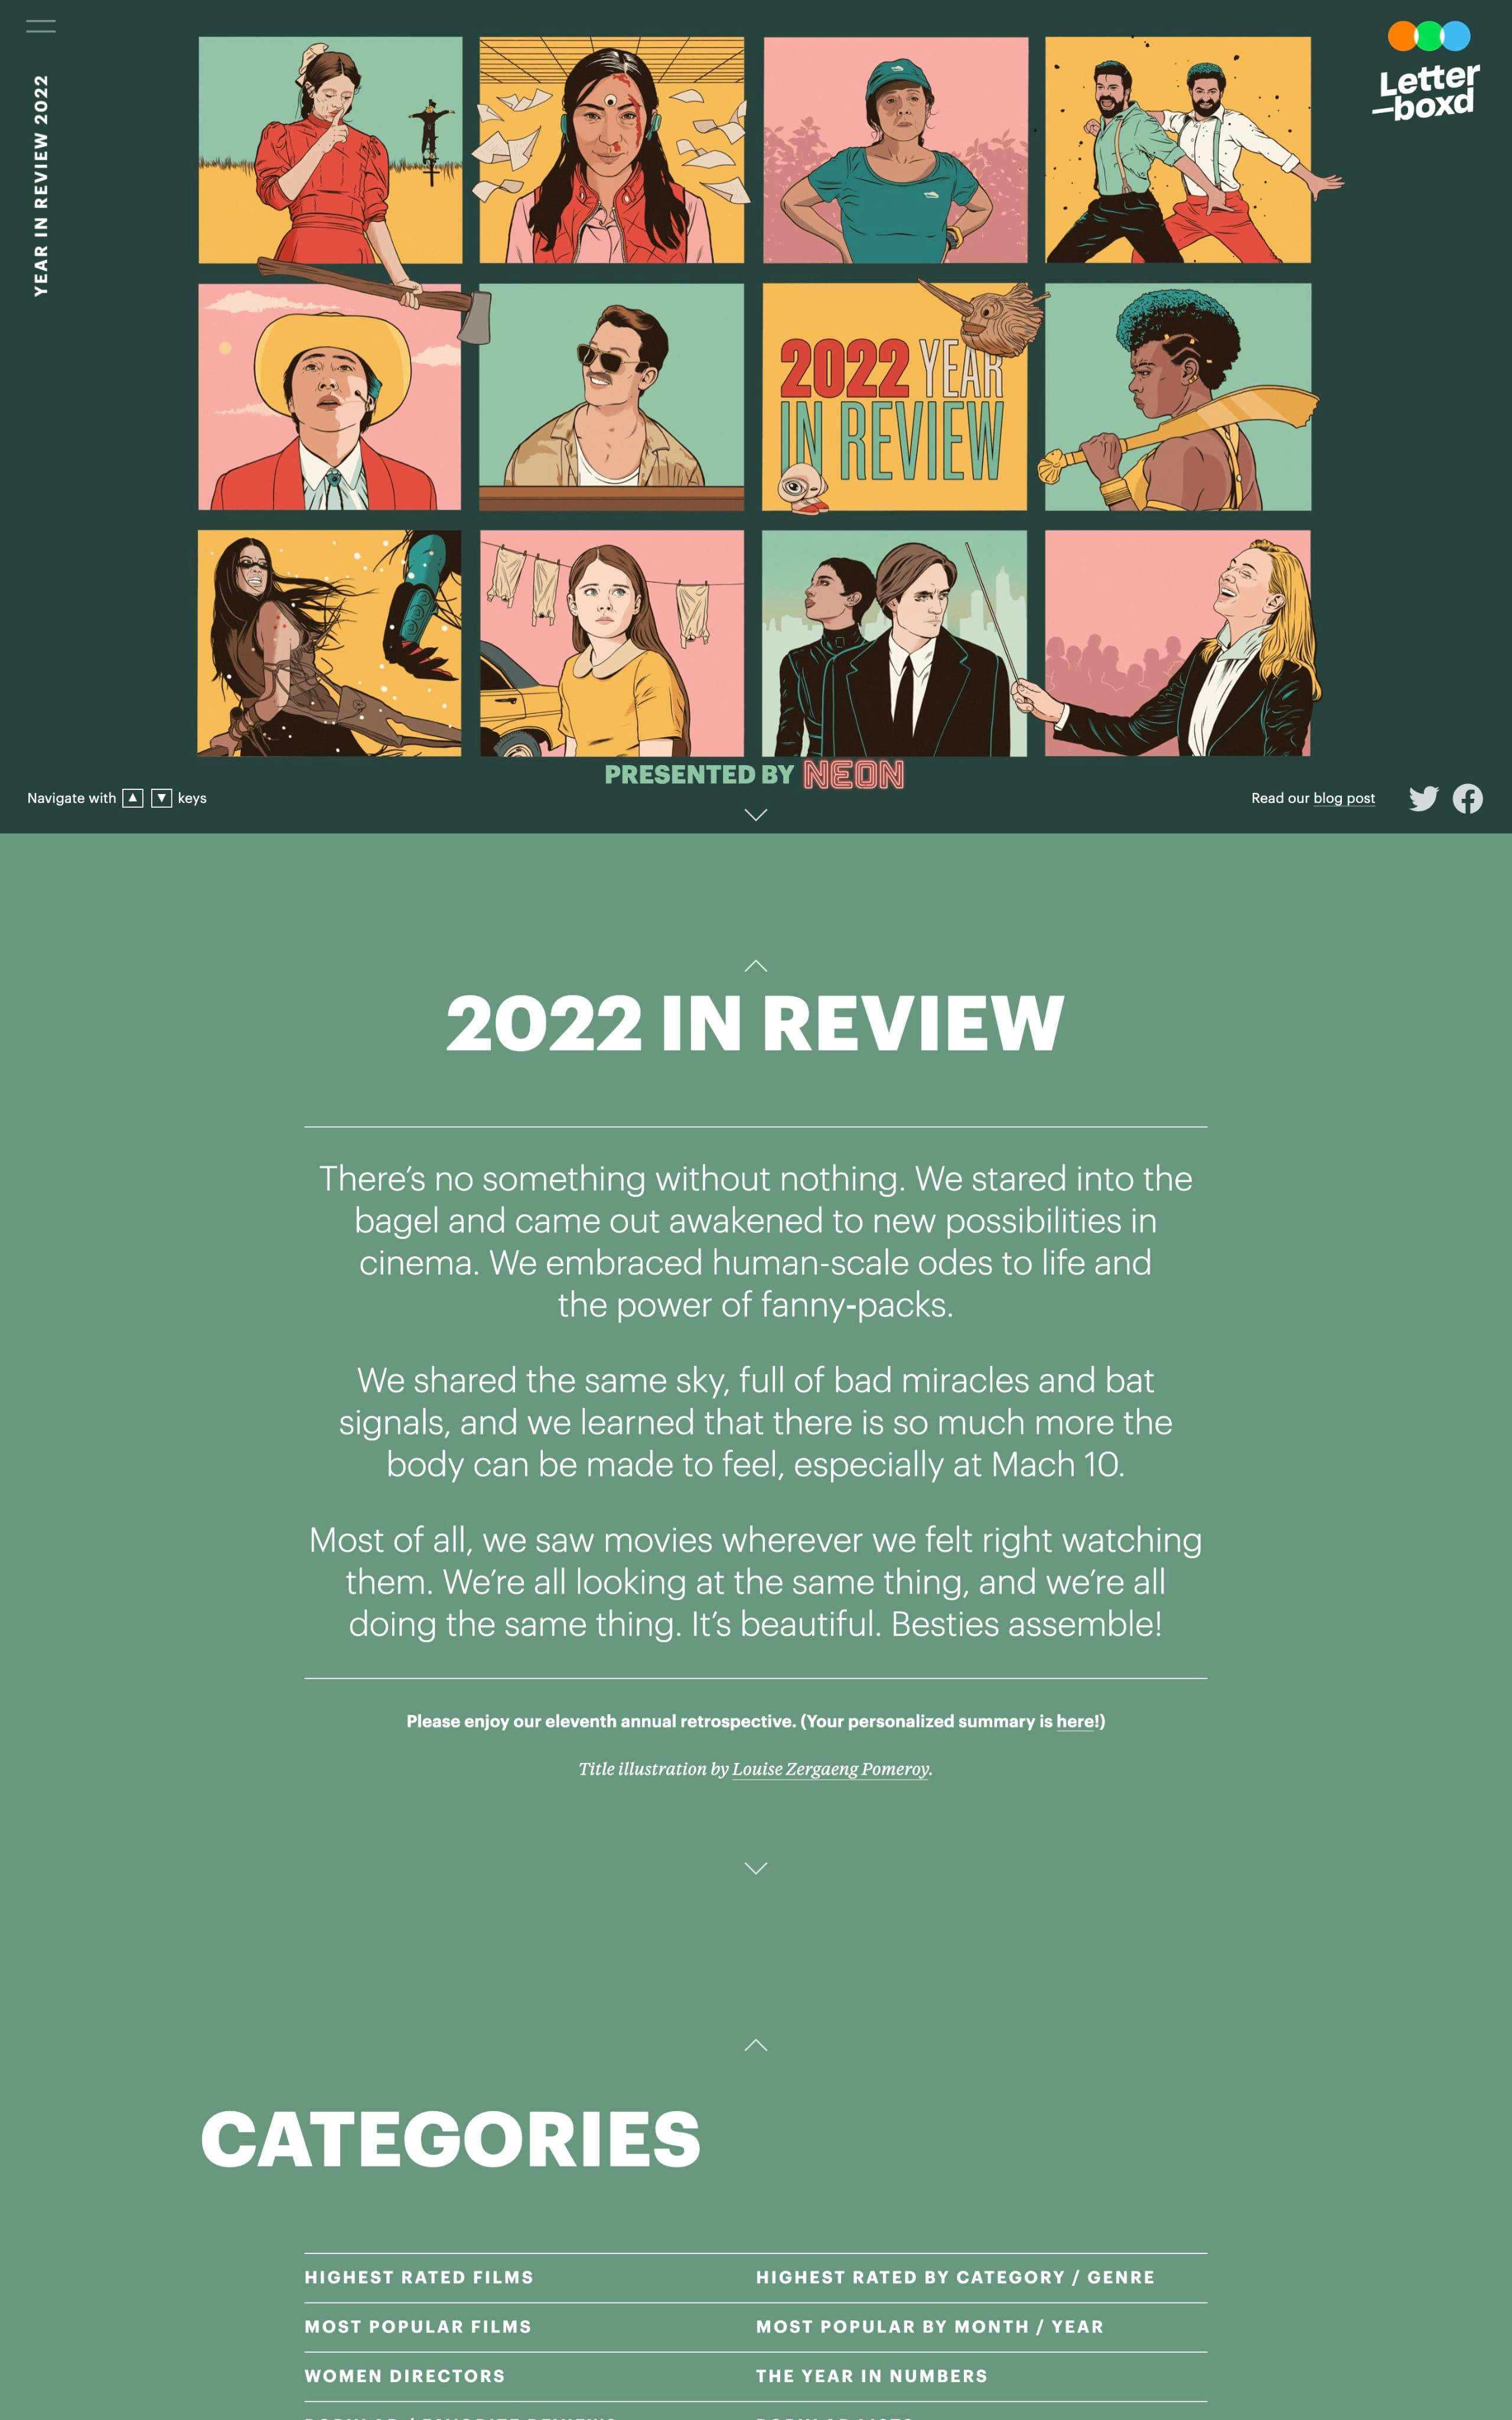 Letterboxd 2022 Year in Review Website Screenshot